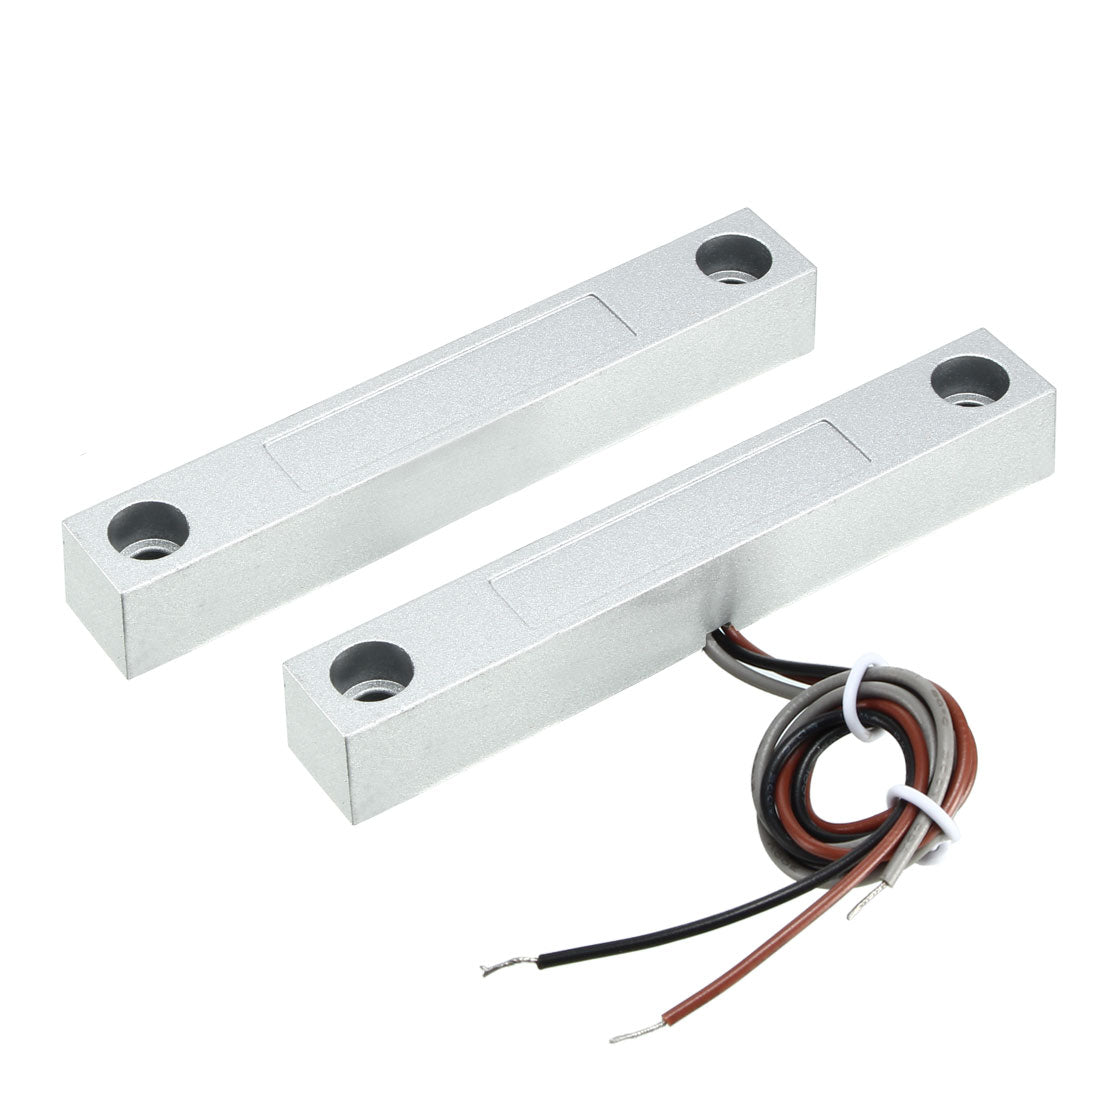 uxcell Uxcell MC-58 NC+NO Alarm Security Rolling Gate Garage Door Contact Magnetic Reed Switch Silver Gray